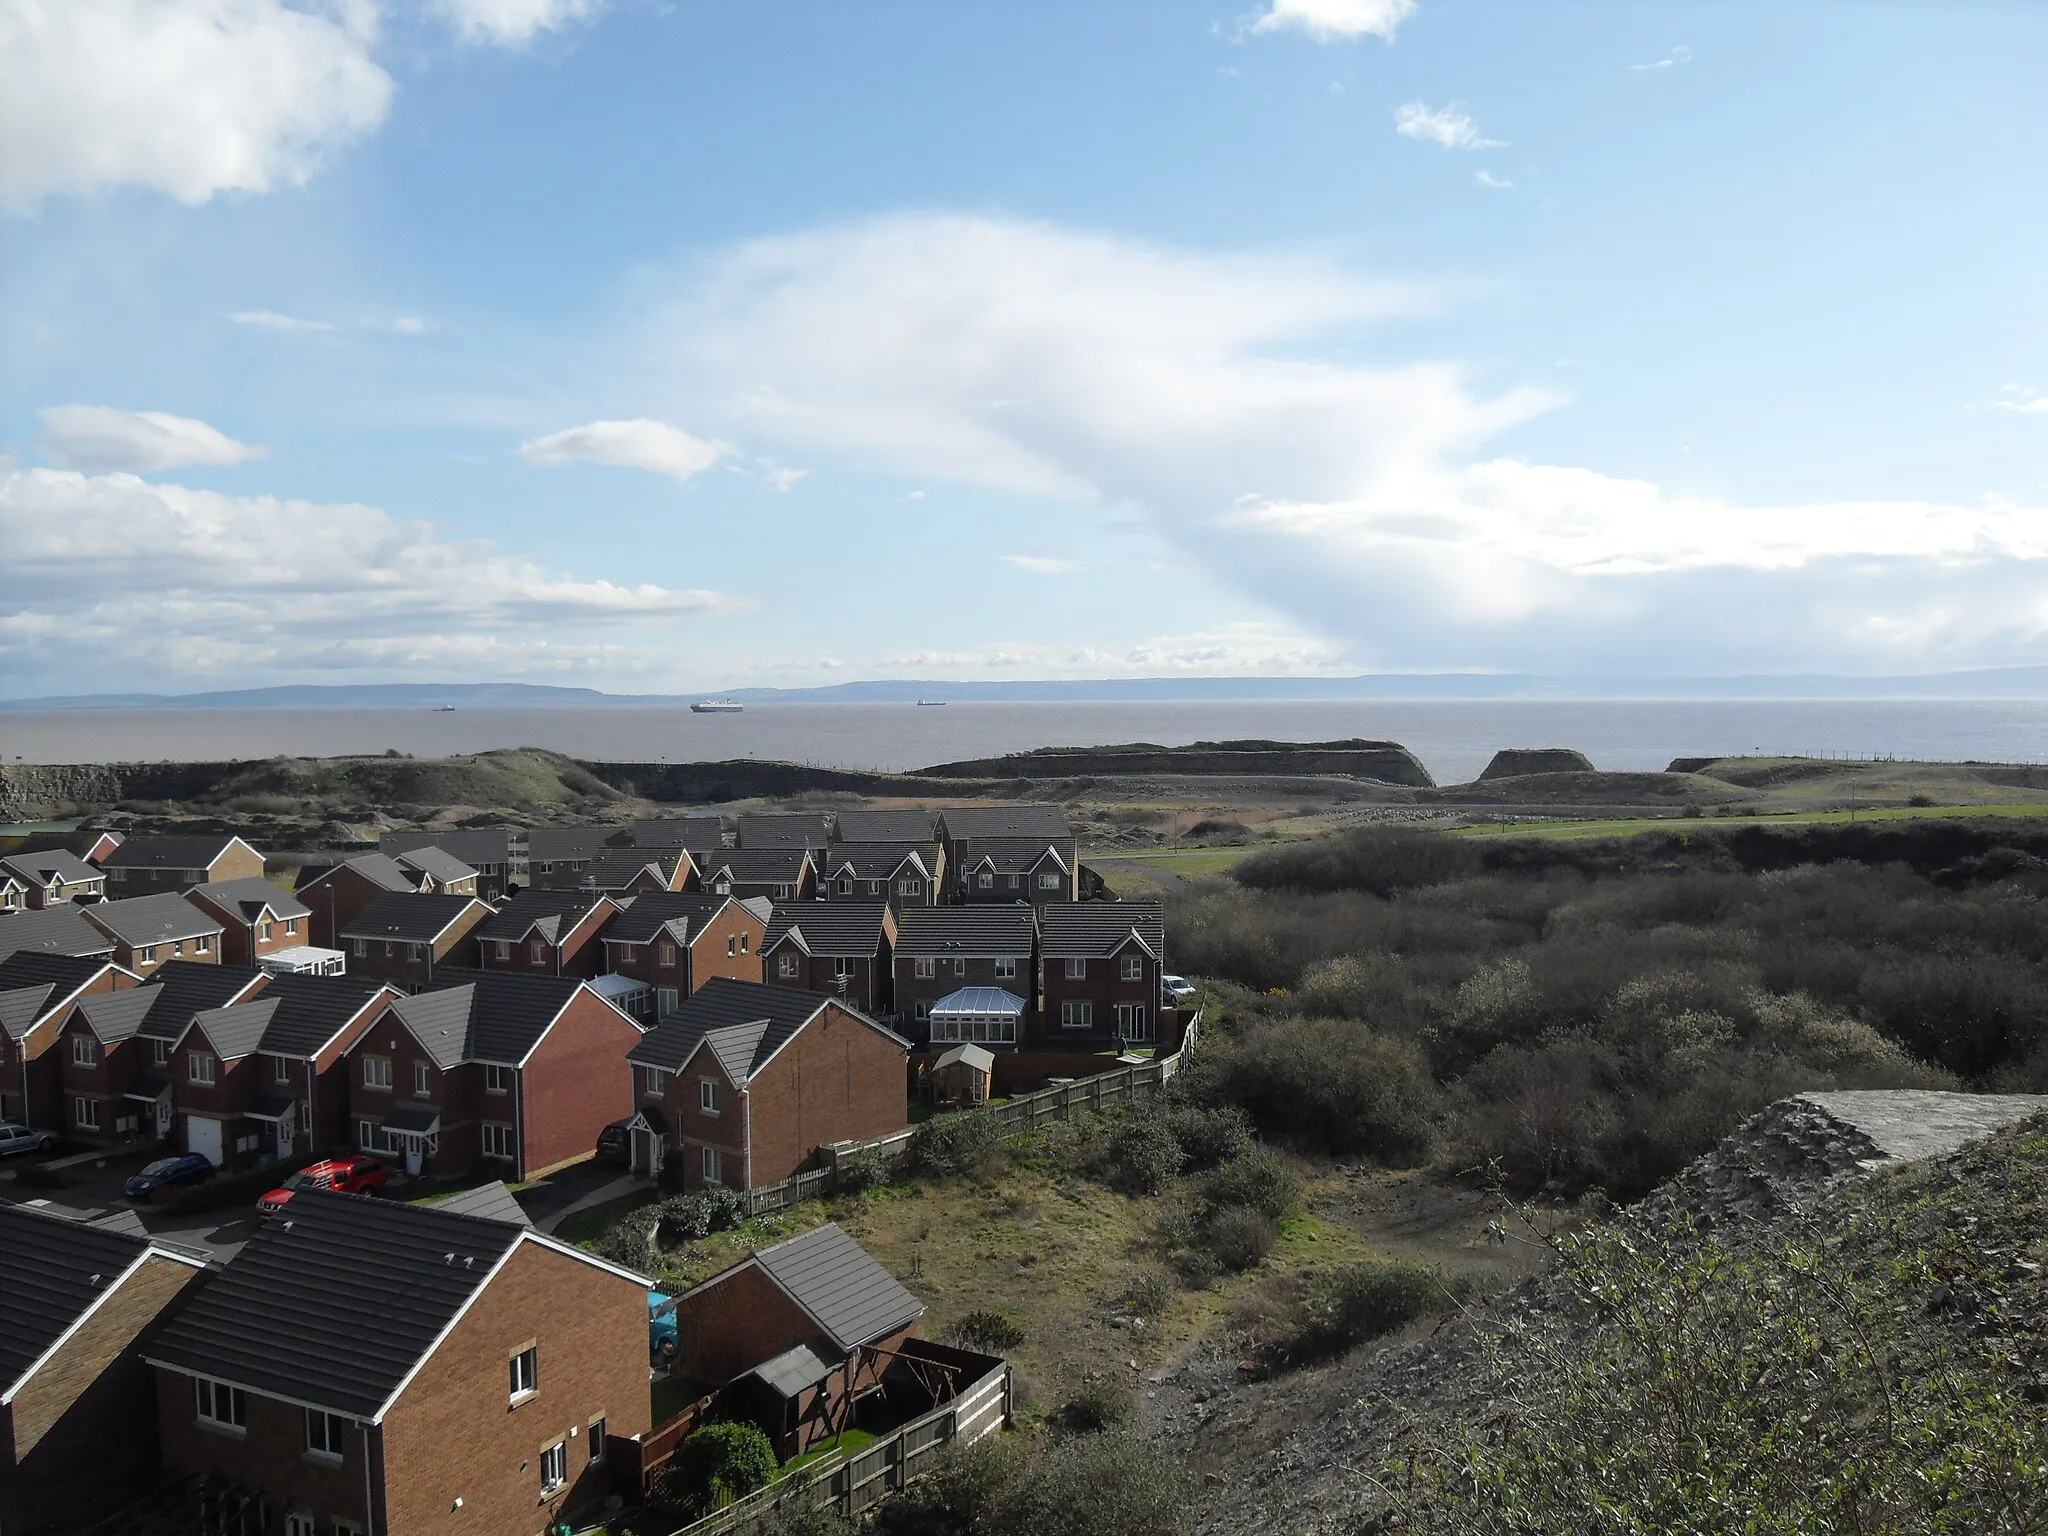 Photo showing: A view over part of Rhoose Point in Wales, facing Southeast with England visible in the distance, across the Bristol Channel